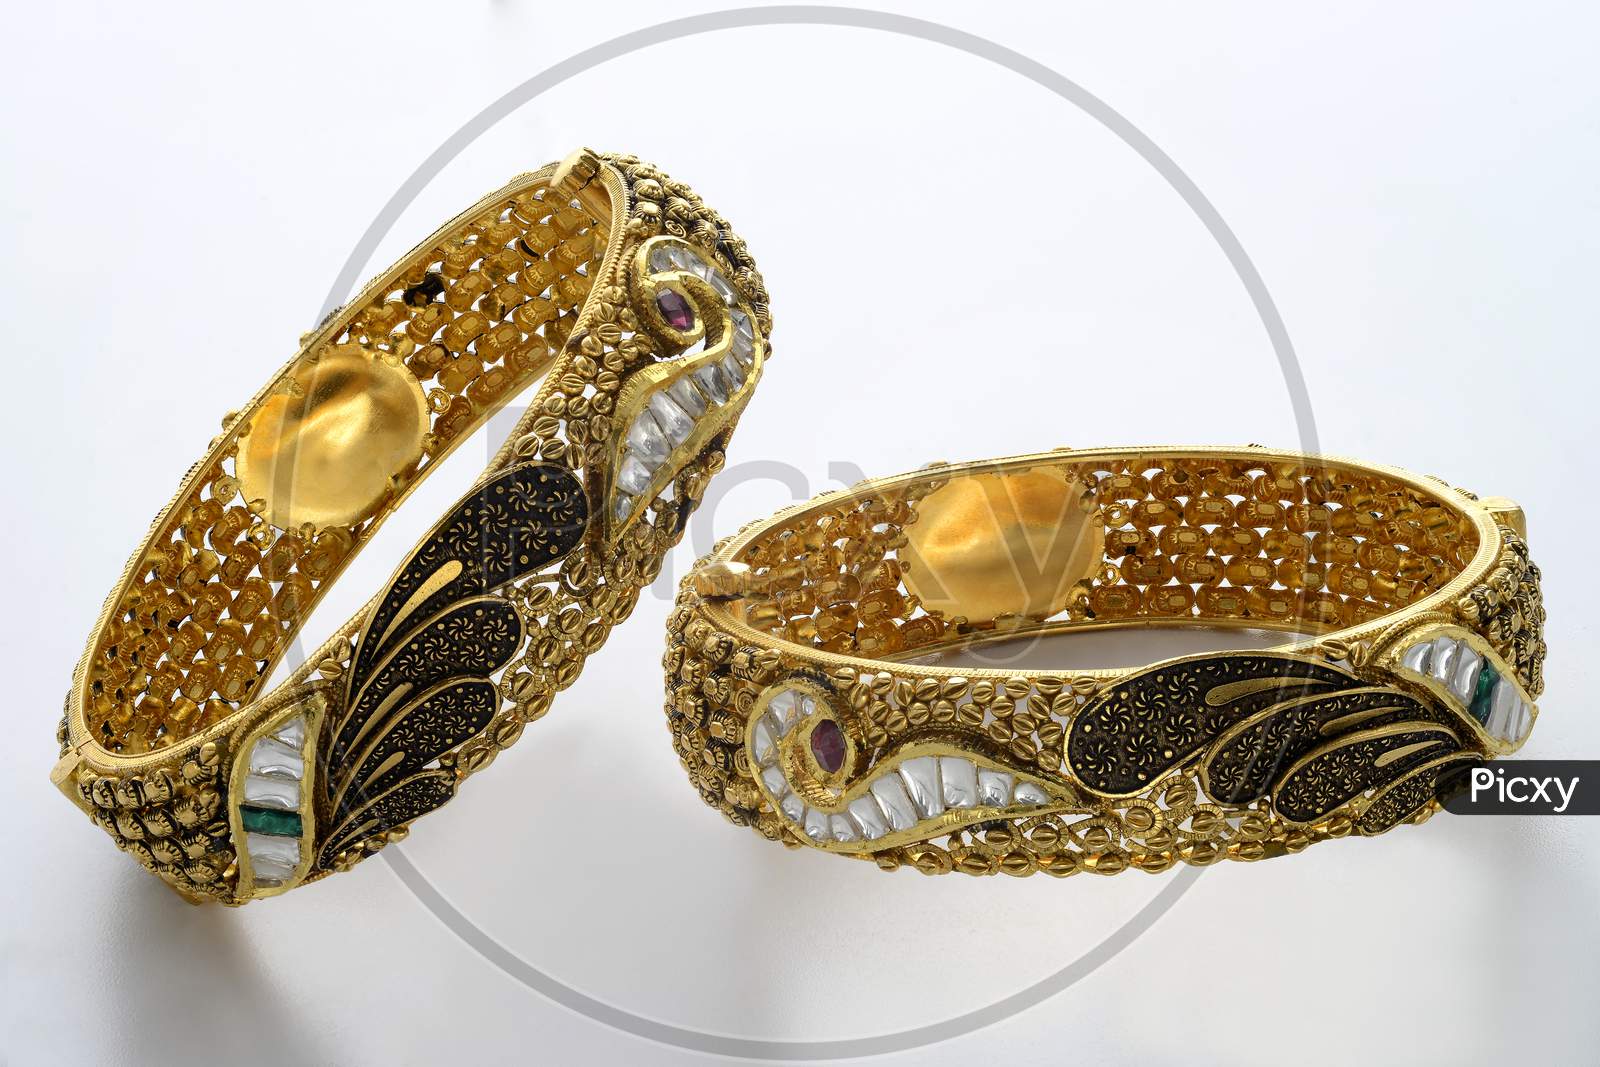 Indian Jewellery Bangles  Designs Over Isolated Background